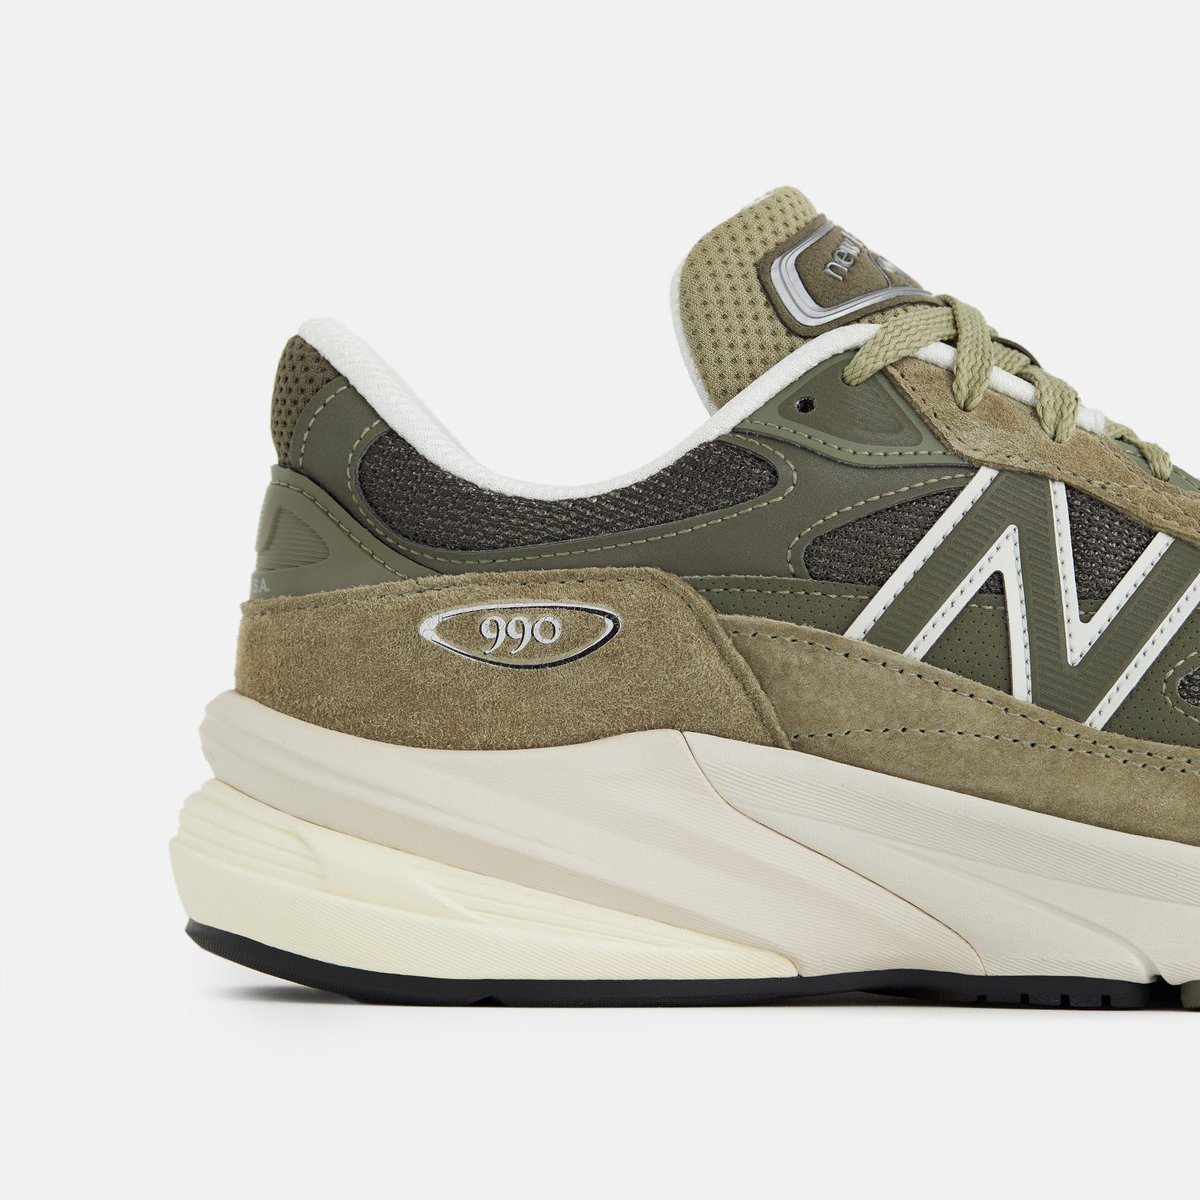 NEW BALANCE MADE IN USA 990V6 “TRUE CAMO” Available now both in-store & online - lapstoneandhammer.com/collections/ne… Men’s sizes: 6-13 ($220).